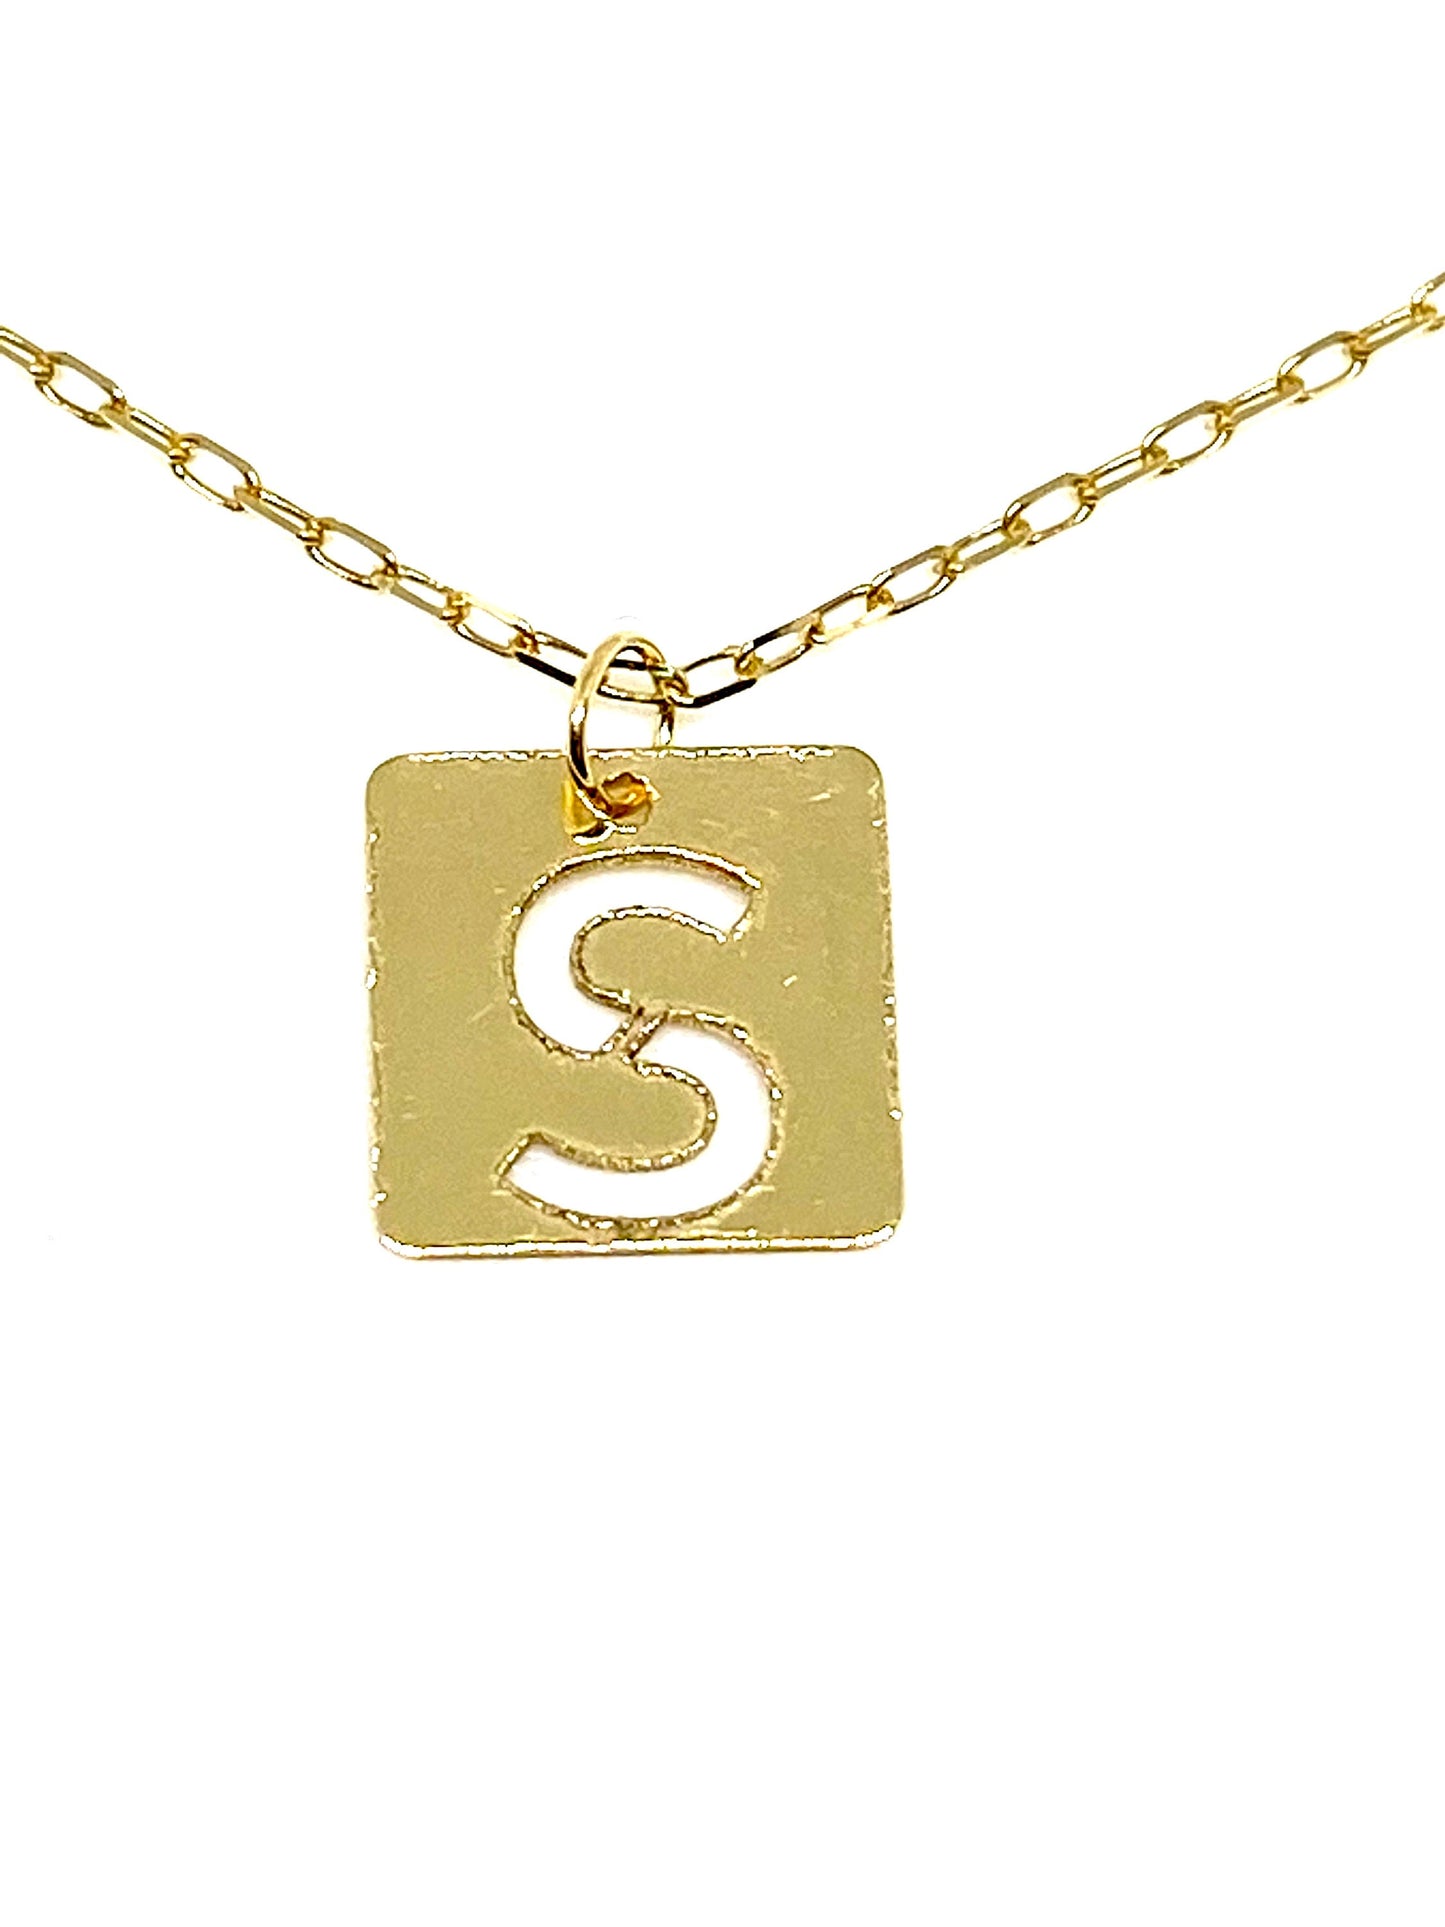 Yellow Gold Cut-out Letter Initial S Square Pendant Chain Necklace